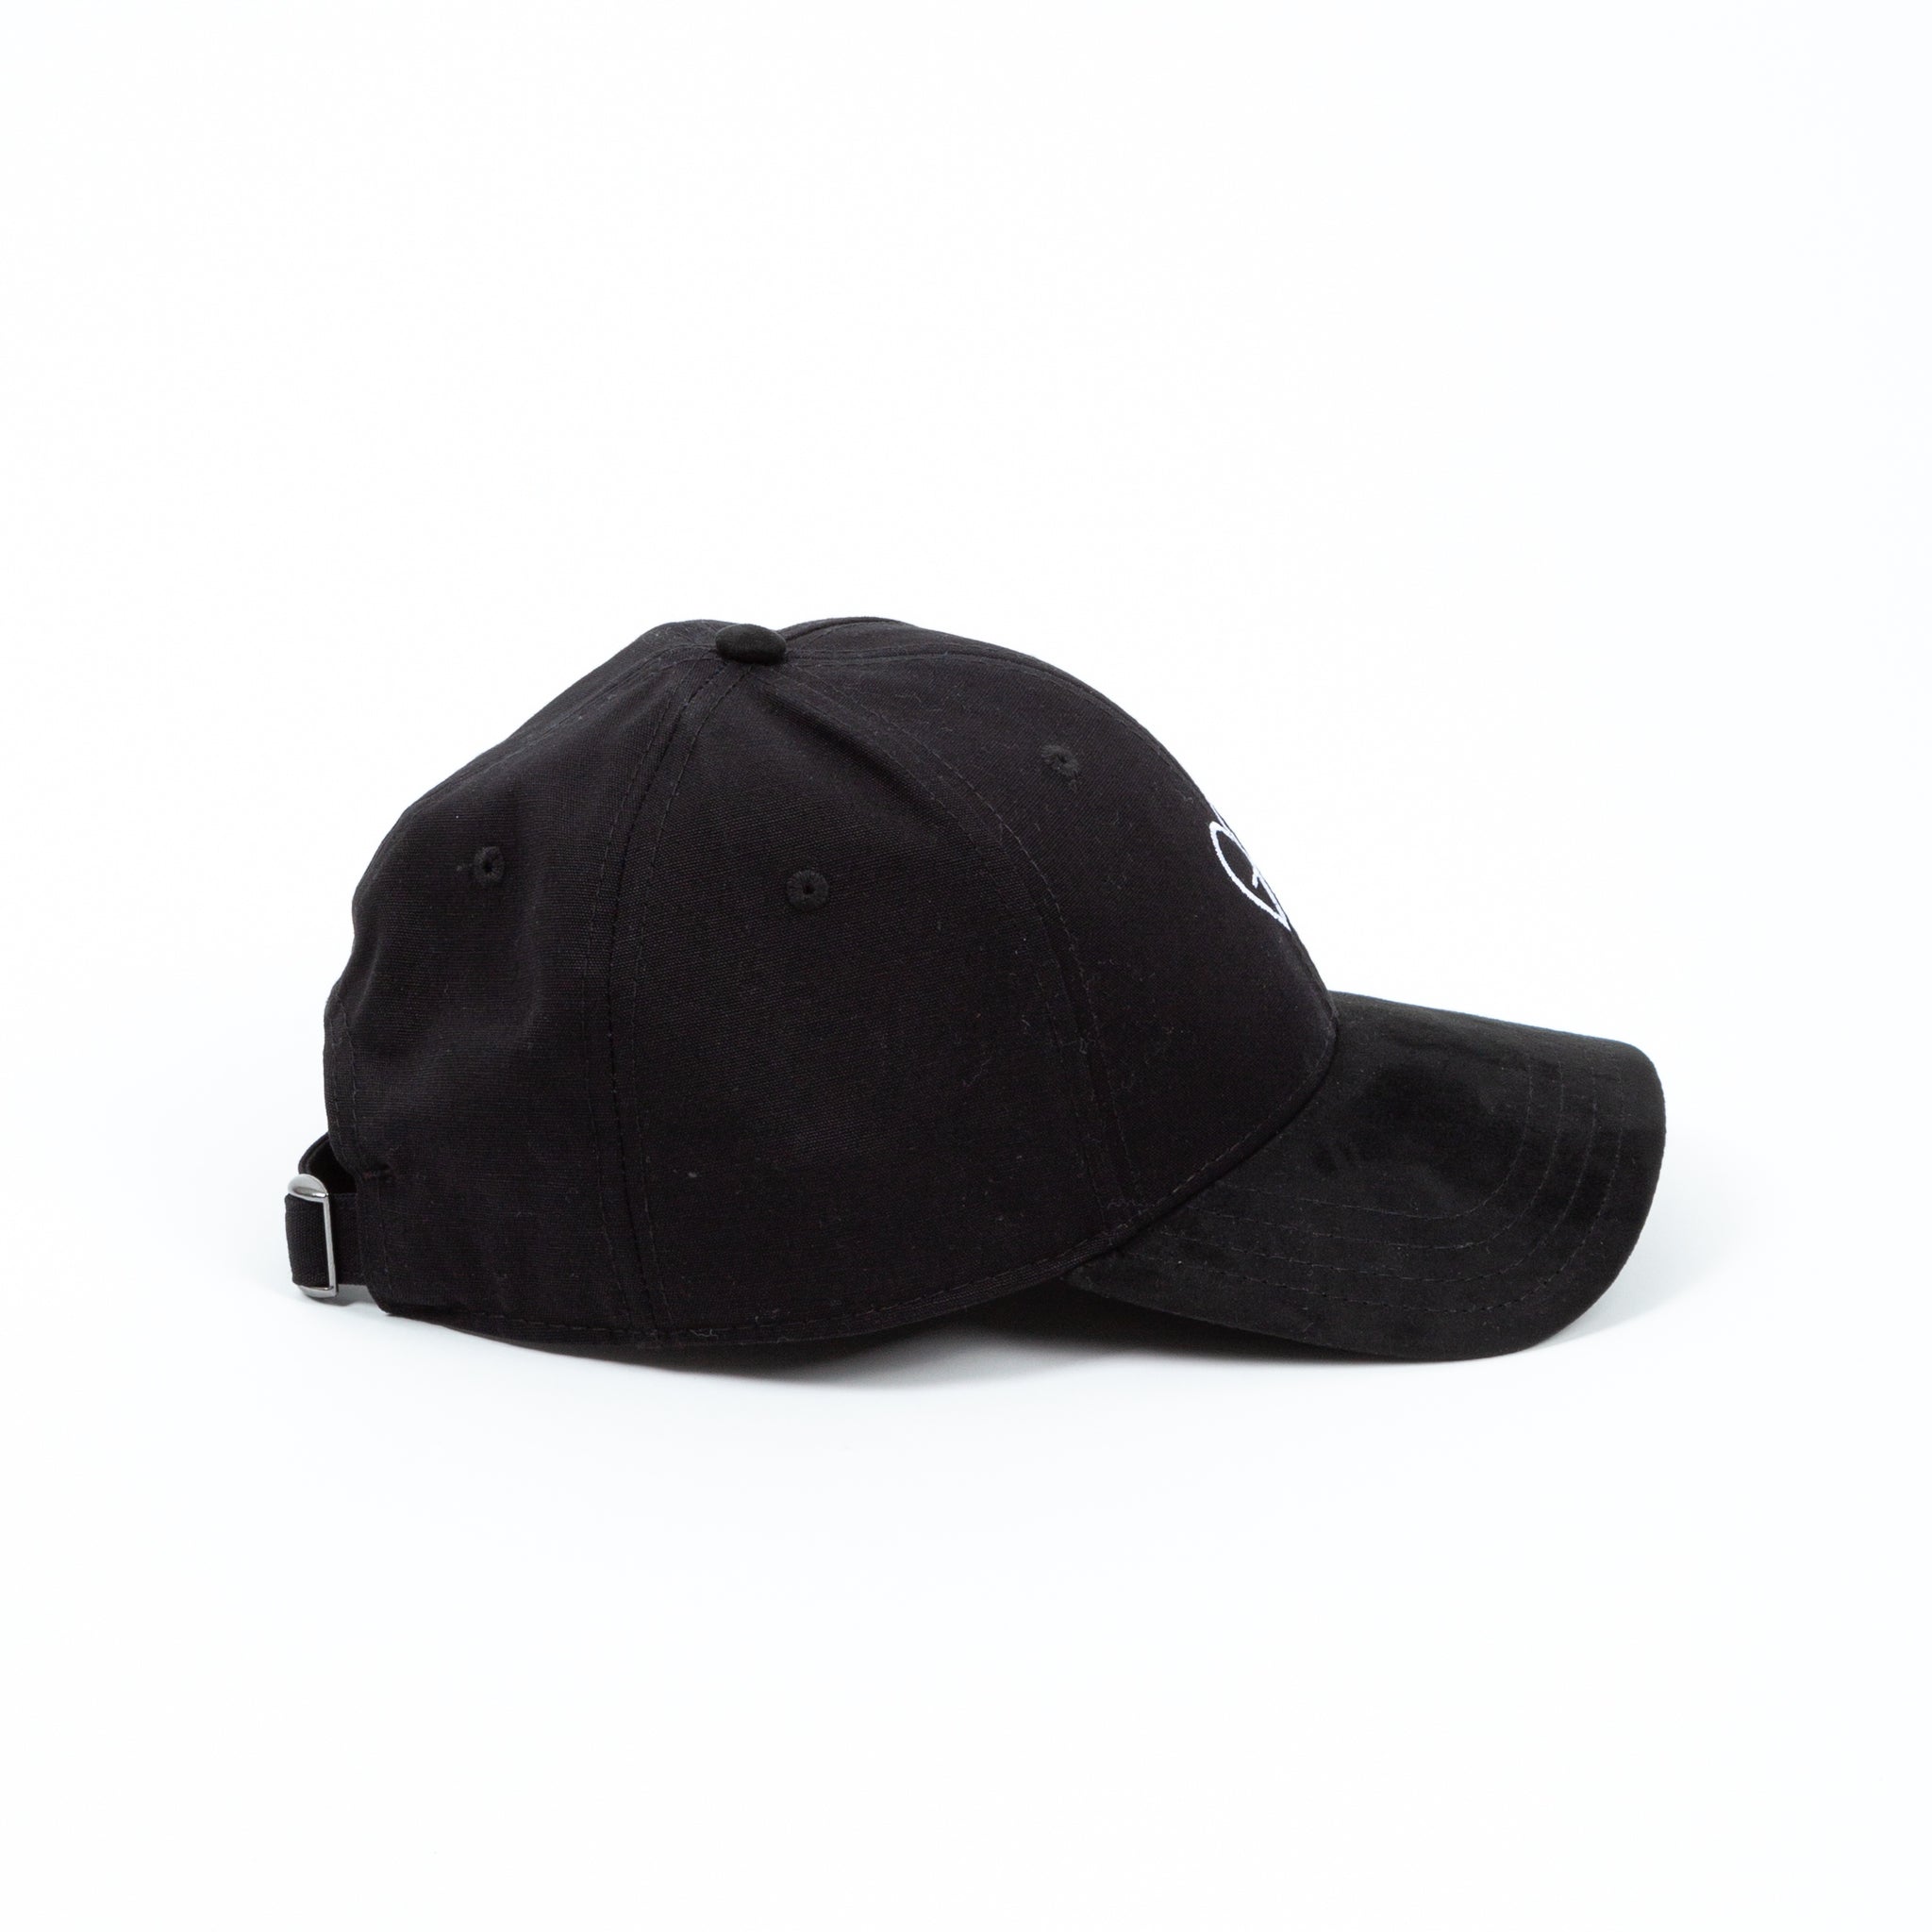 The Galey Alix Design Hat - Two Tone